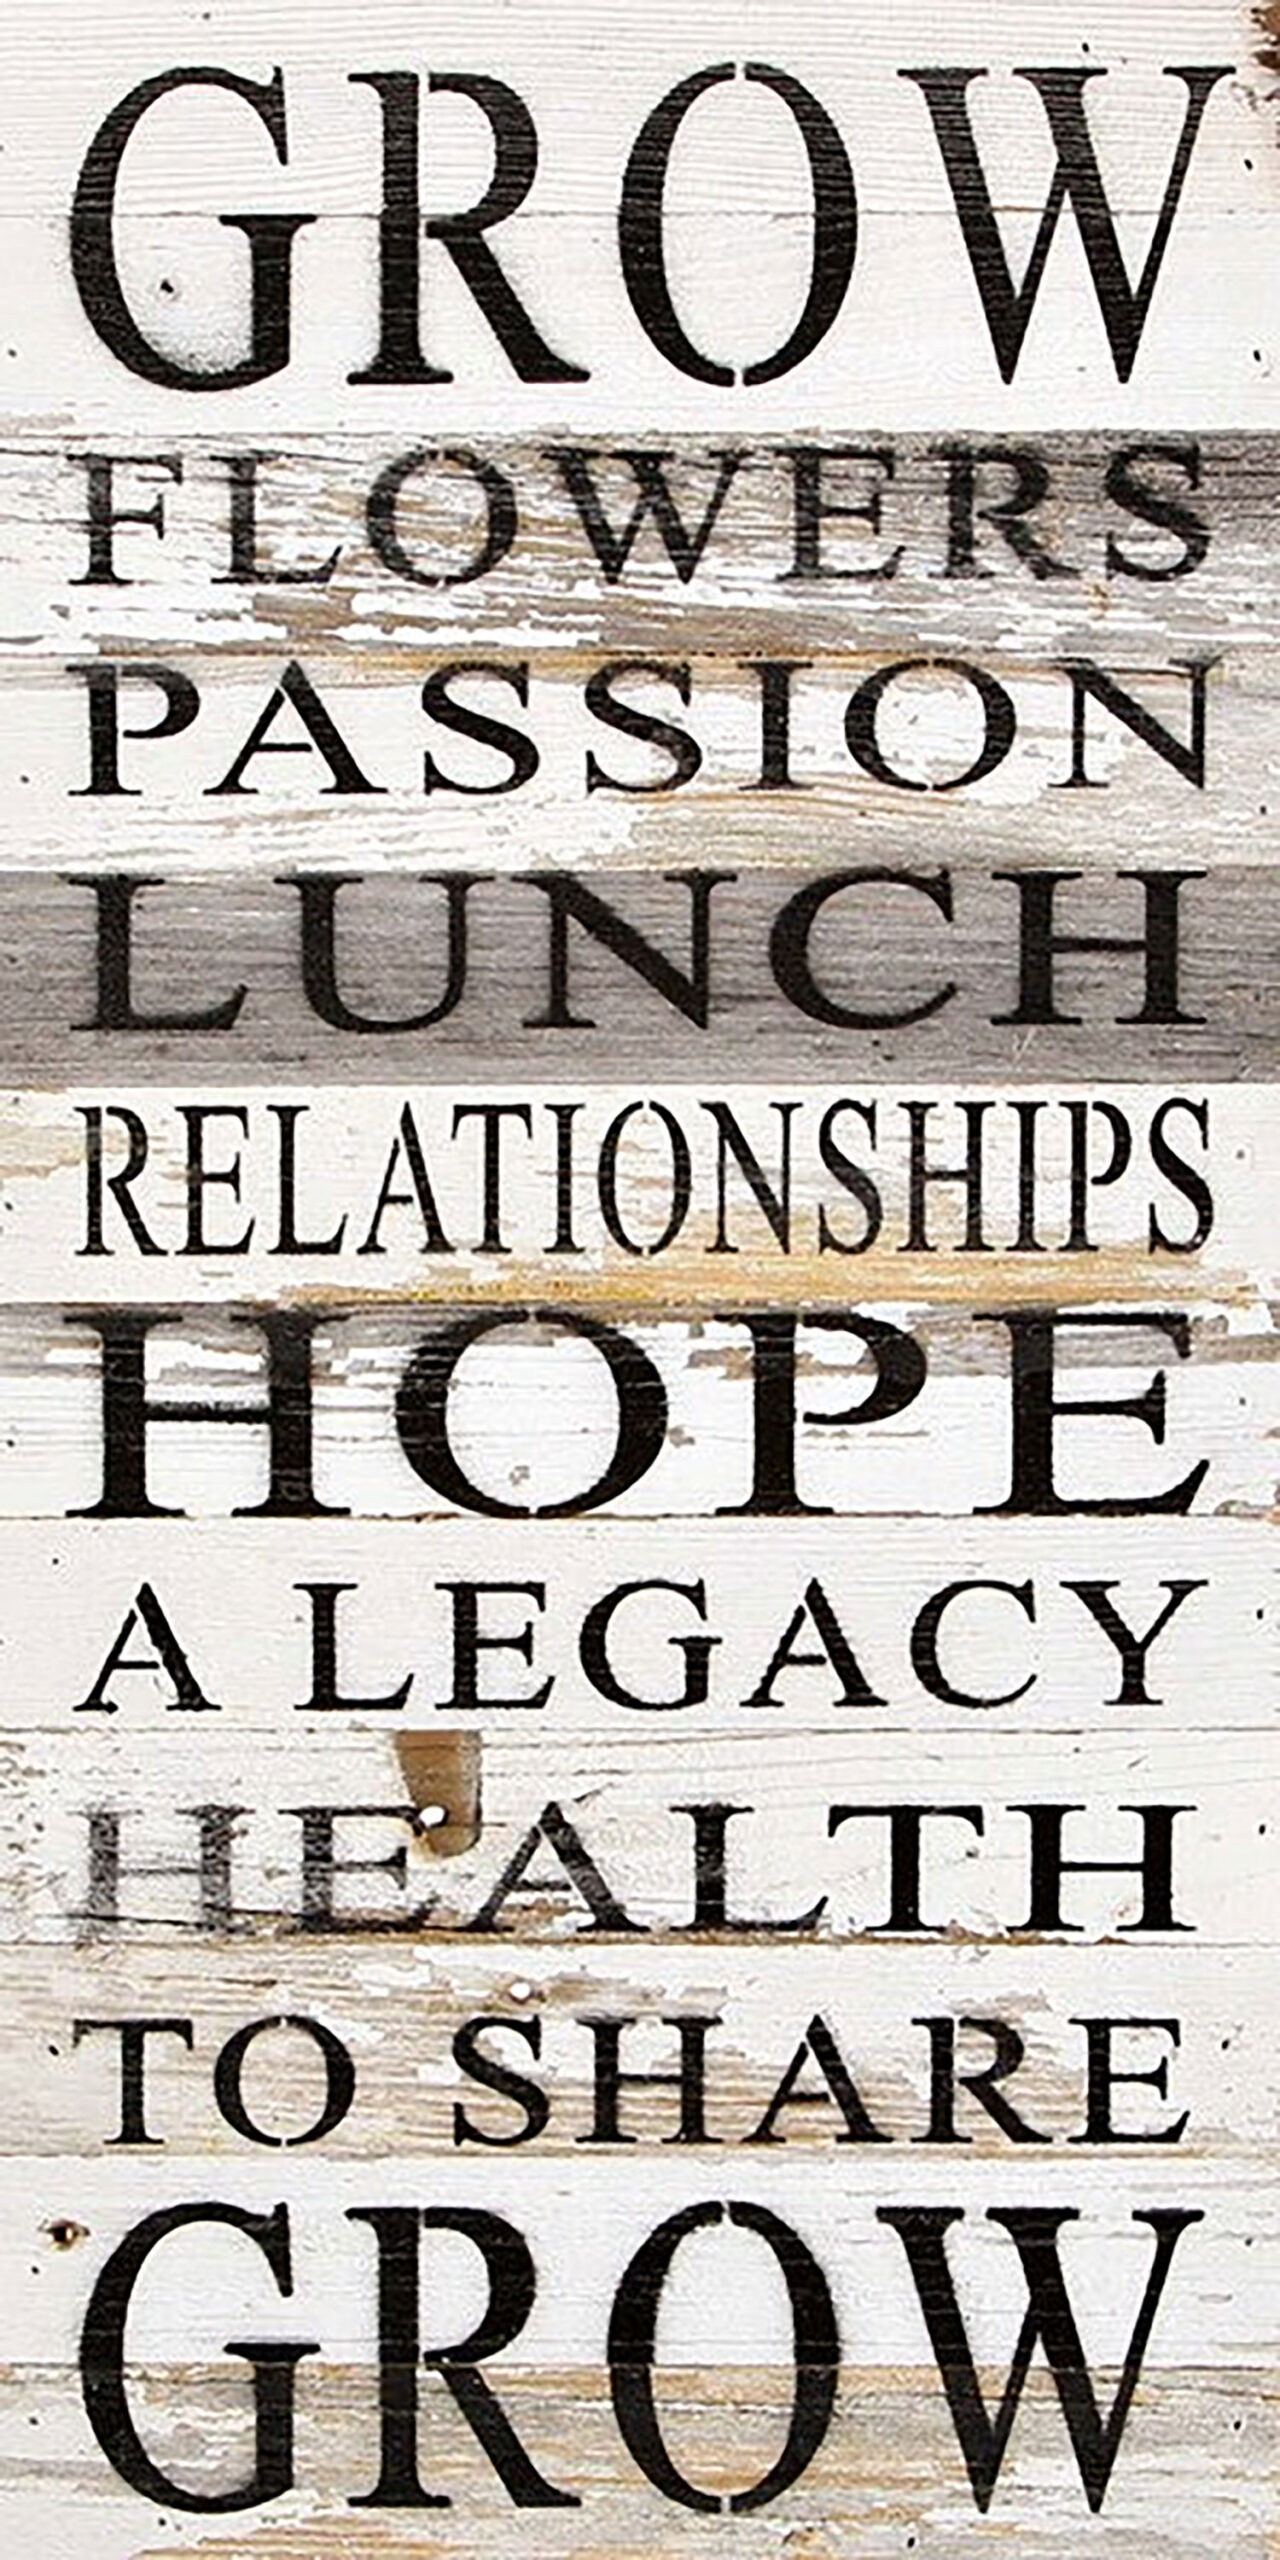 Grow flowers, passion, lunch, relationships, hope, a legacy, health, to share, grow. / 12"x24" Reclaimed Wood Sign